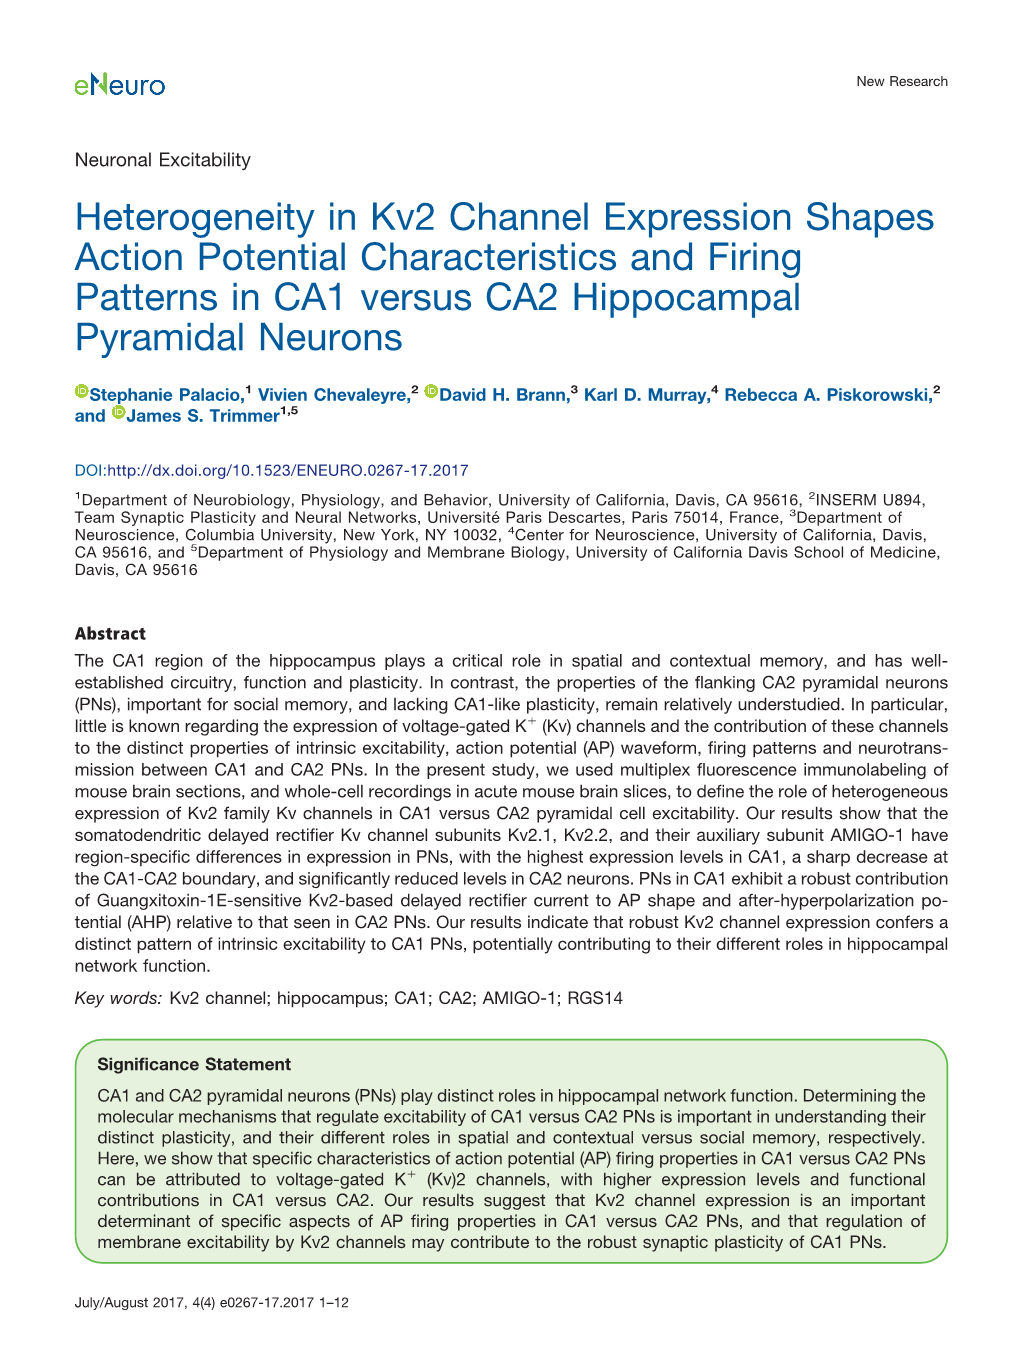 Heterogeneity in Kv2 Channel Expression Shapes Action Potential Characteristics and Firing Patterns in CA1 Versus CA2 Hippocampal Pyramidal Neurons